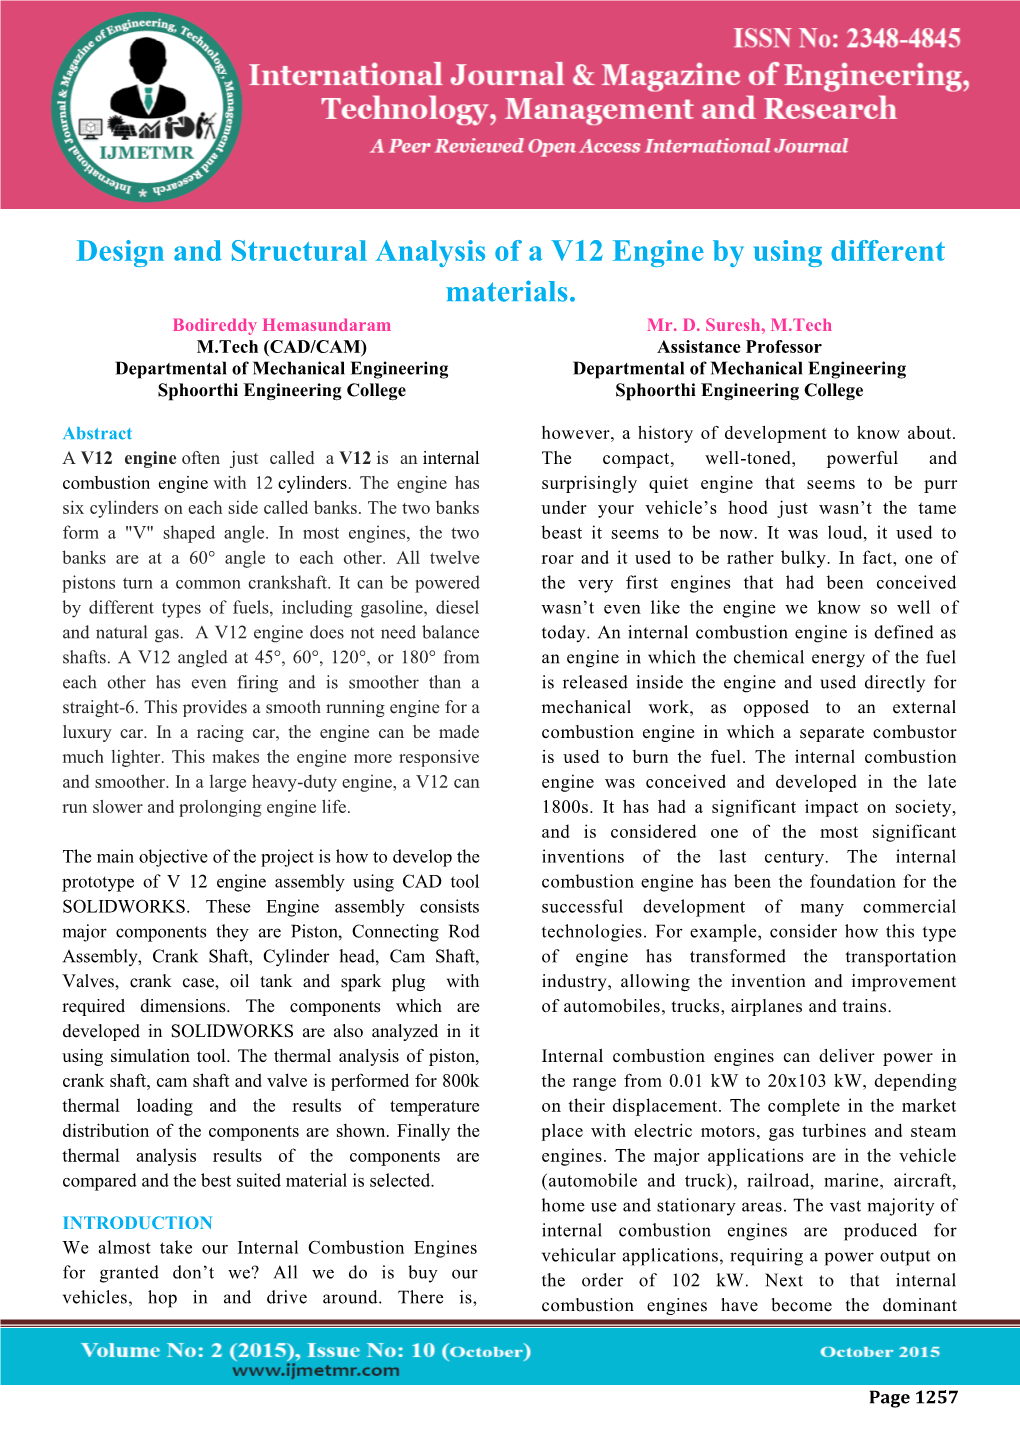 Design and Structural Analysis of a V12 Engine by Using Different Materials